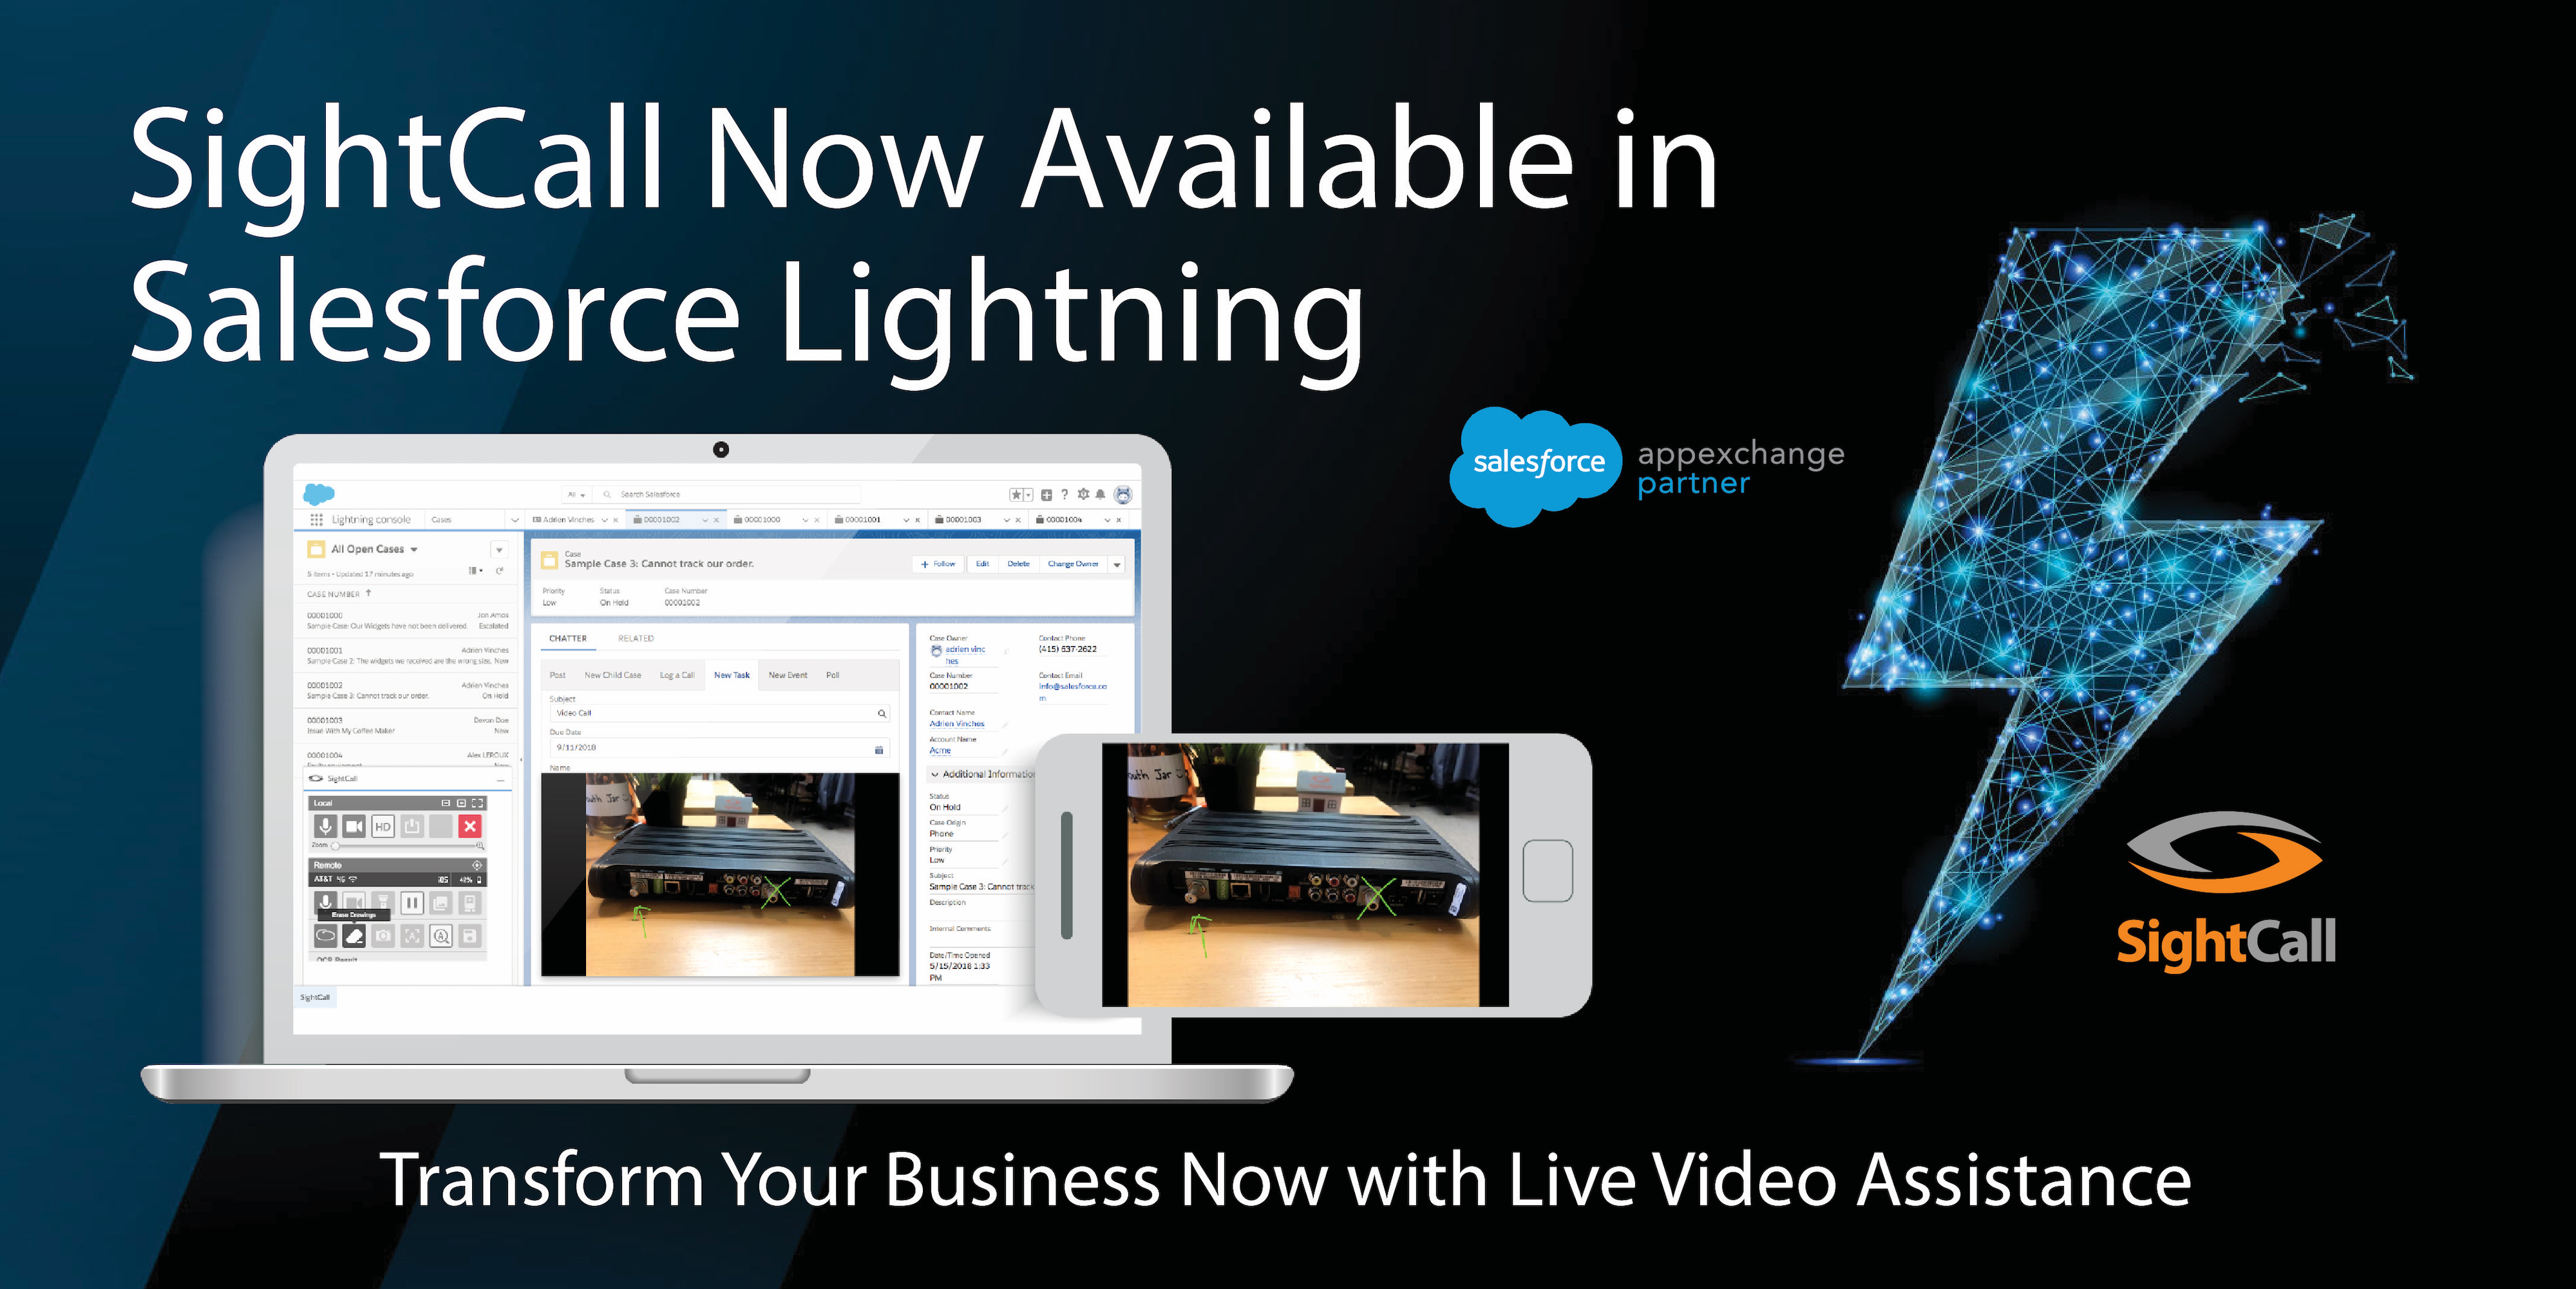 SightCall Visual Support for Salesforce Lightning